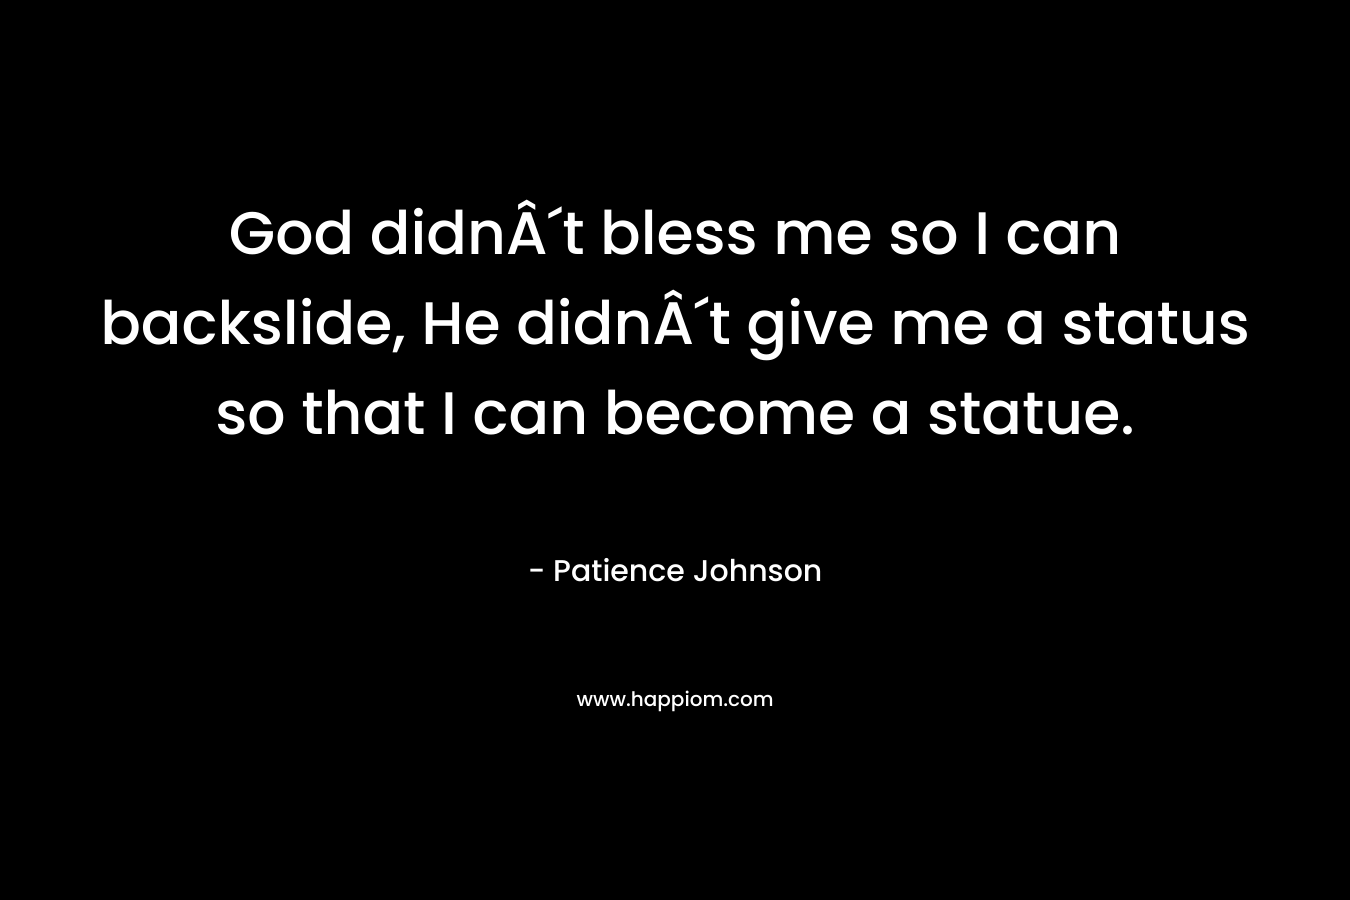 God didnÂ´t bless me so I can backslide, He didnÂ´t give me a status so that I can become a statue. – Patience Johnson